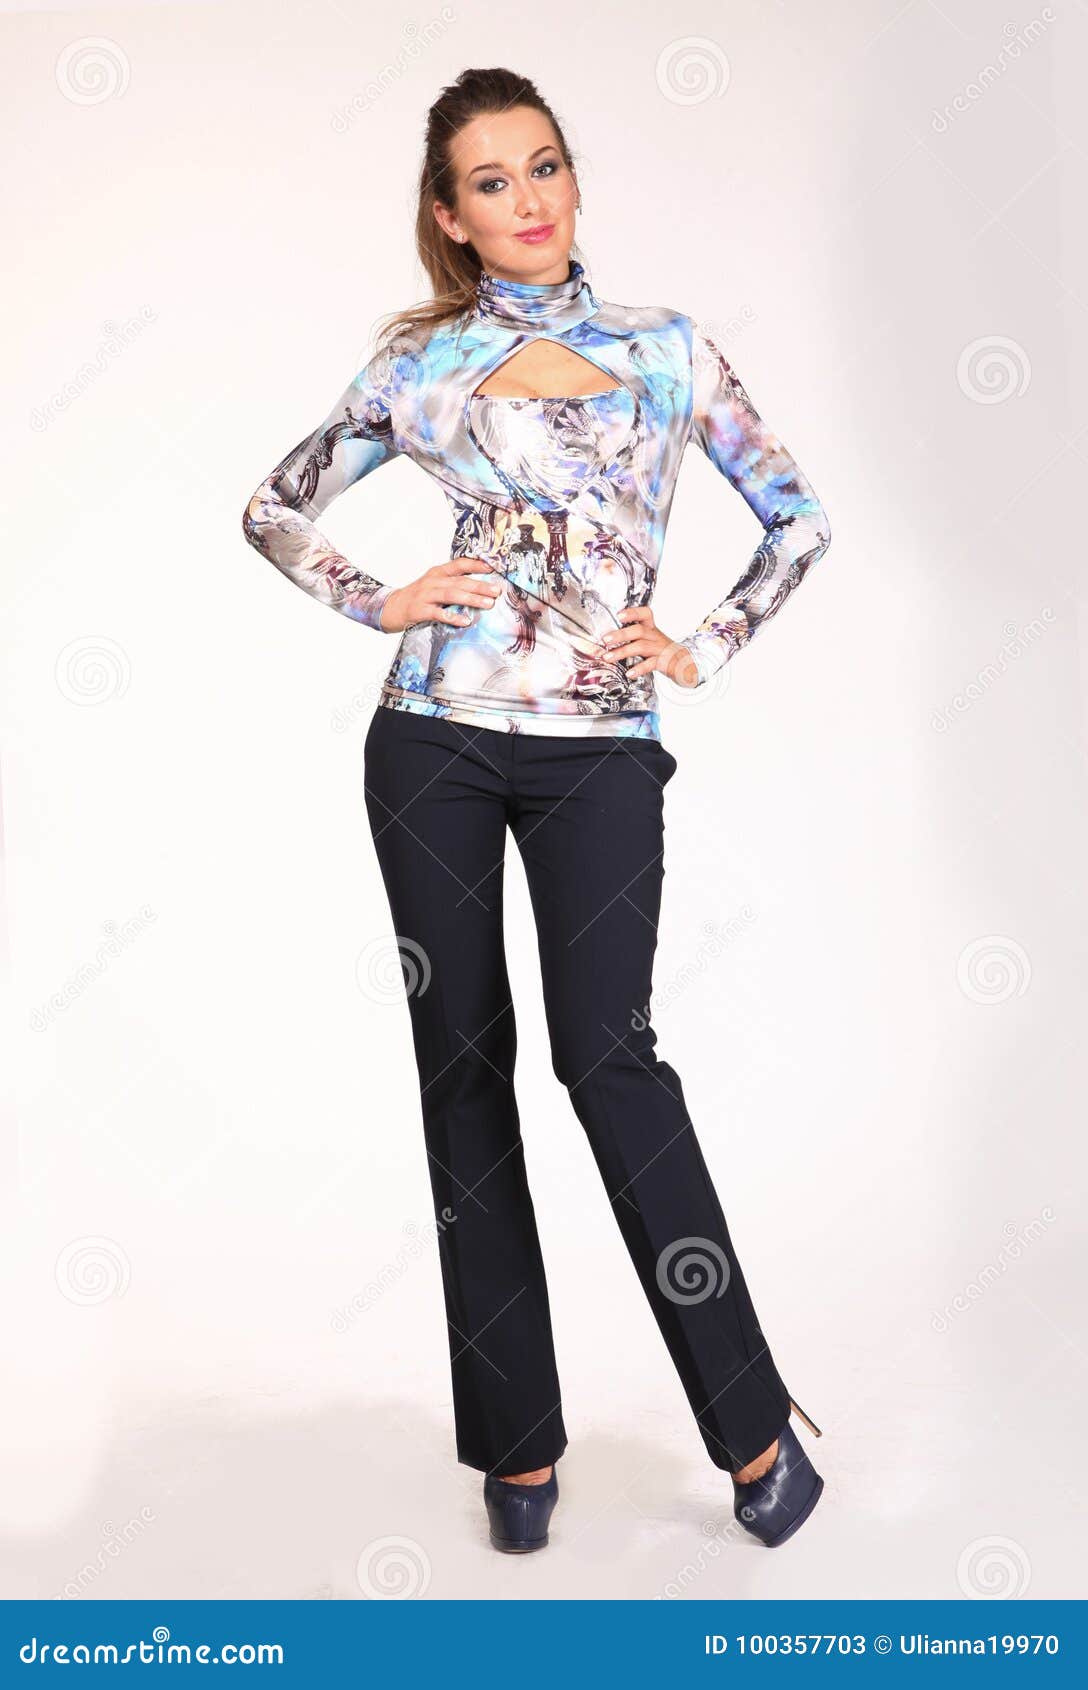 Top Stylish Outstanding Fashion Able Blouse designs With print trousers  Casual Dresses Party wea  YouTube